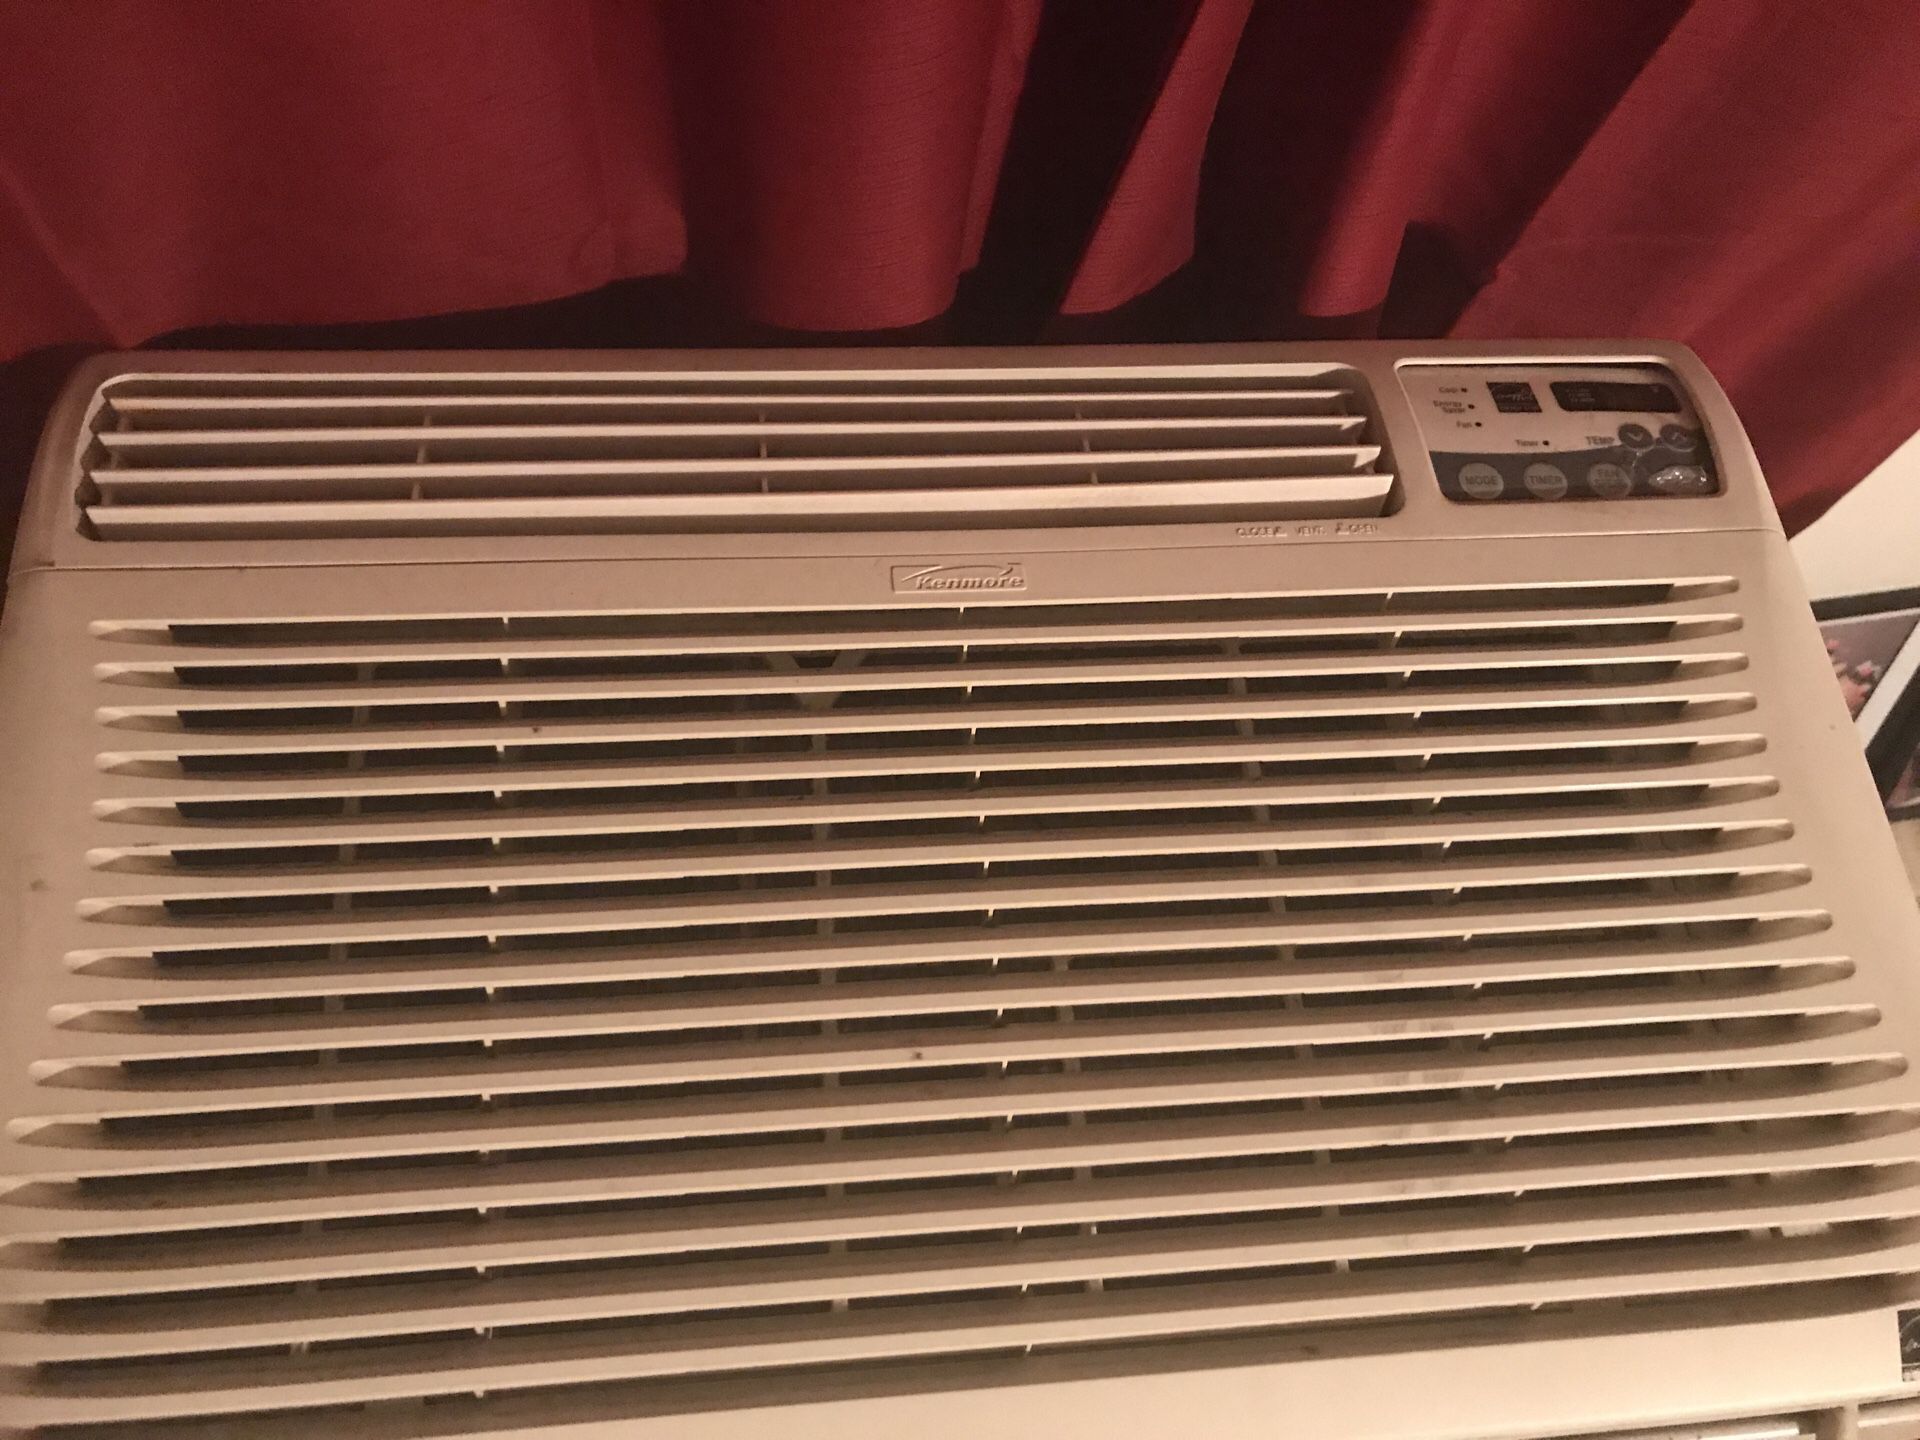 12,000 BTU air conditioner in excellent condition blows very cold air